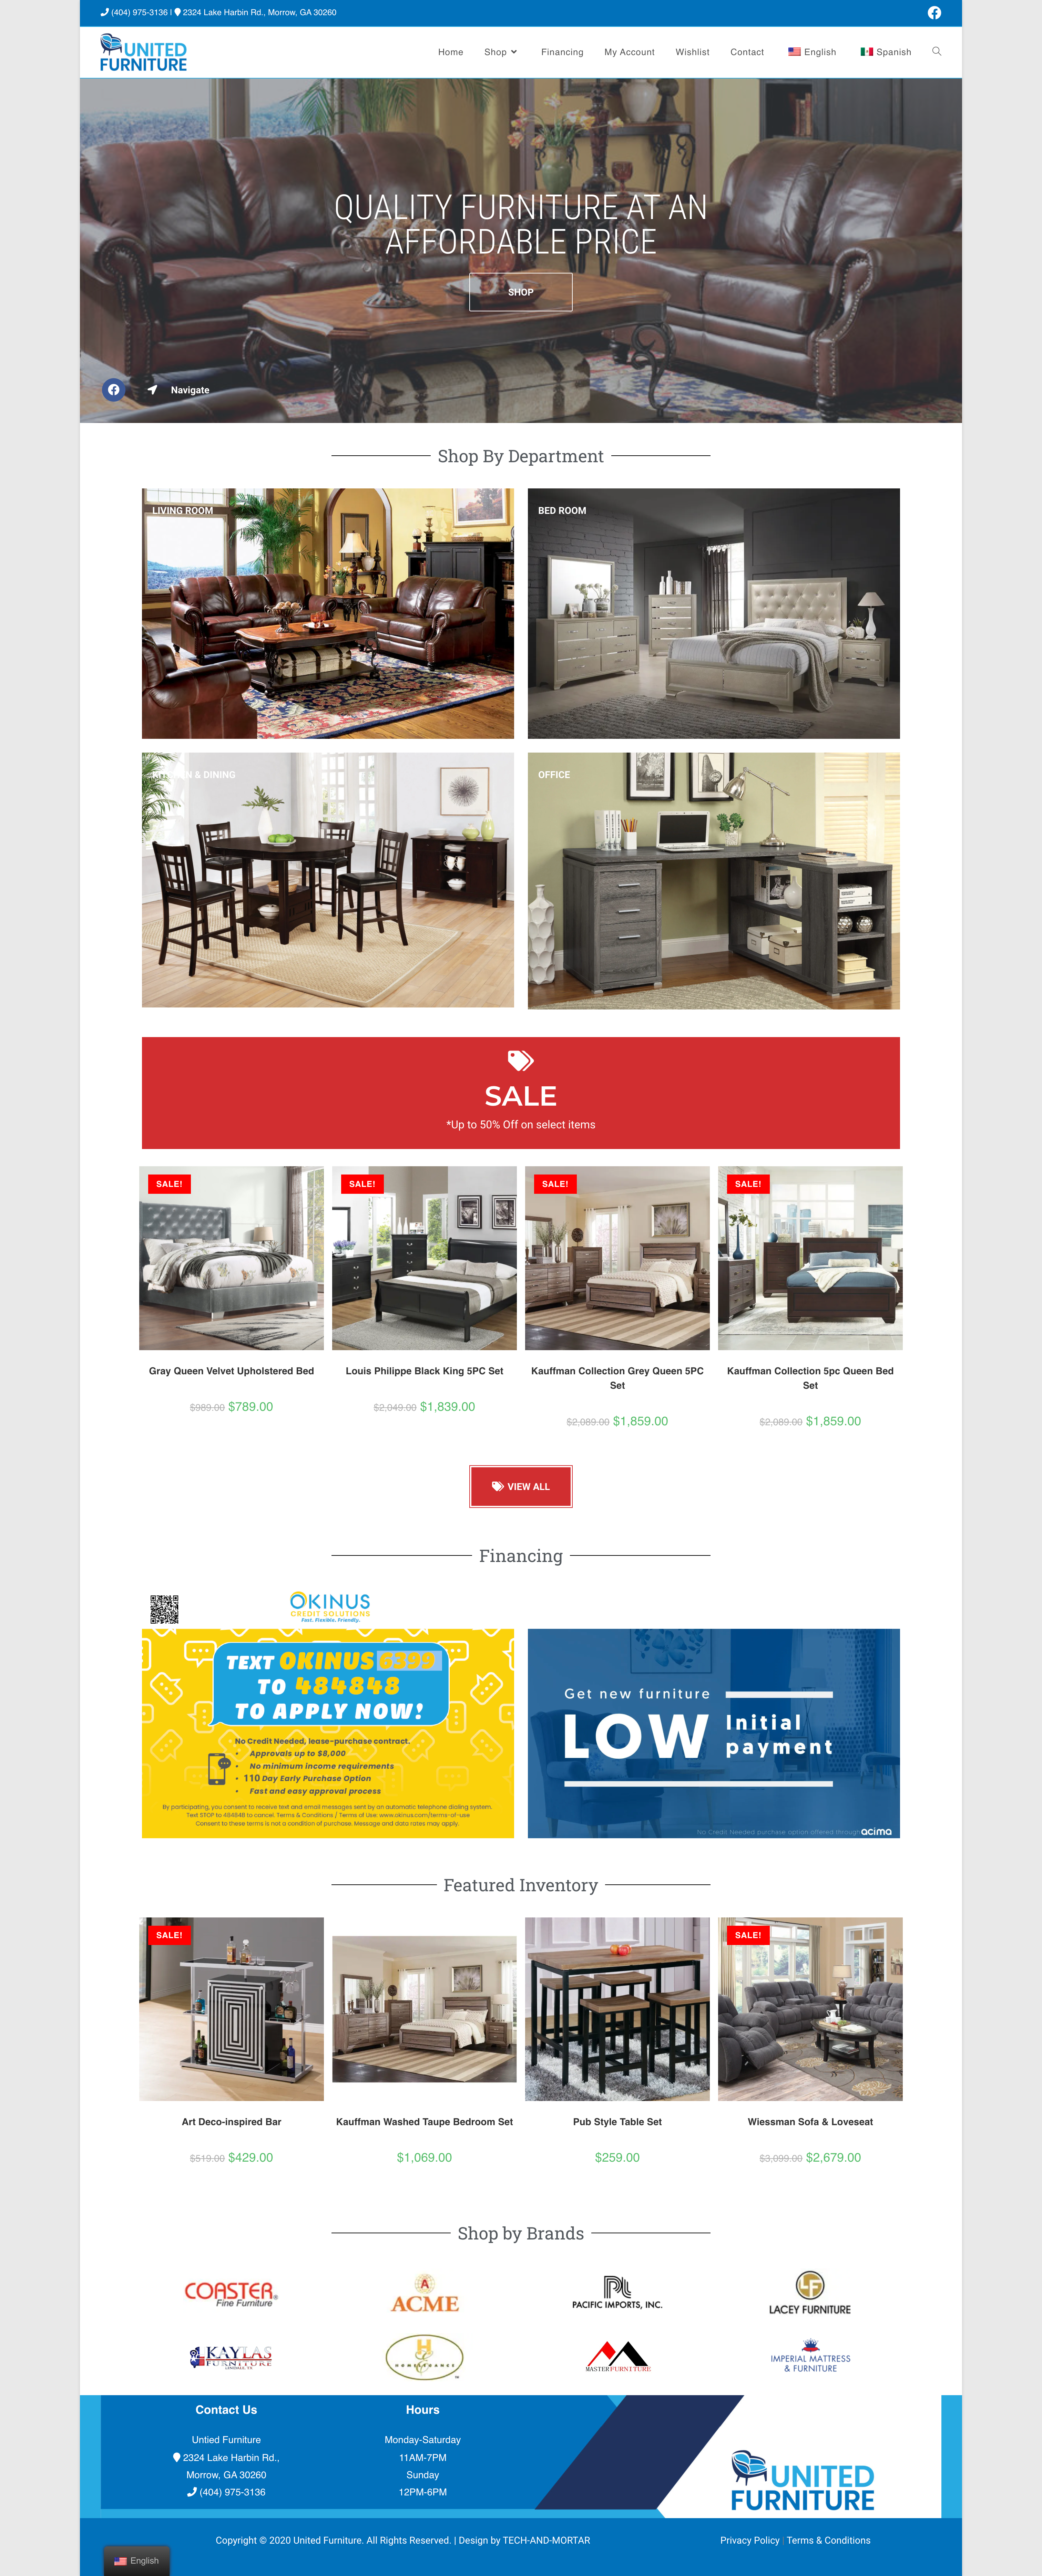 United Furniture – Quality furniture at an affordable price